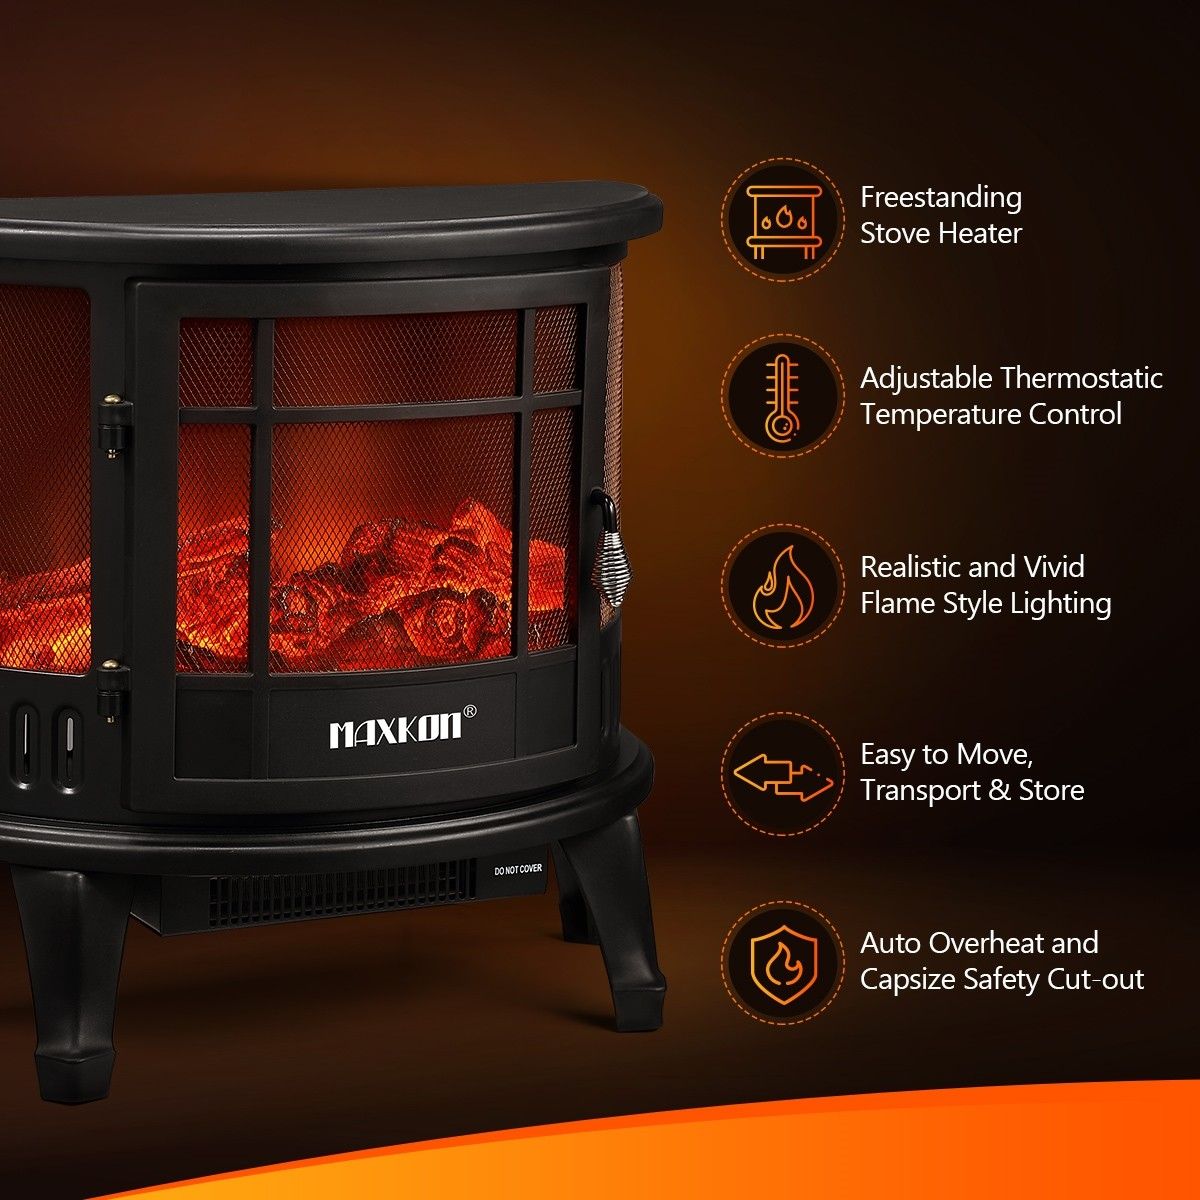 Electric Stove Galleon Fires Ida 3D Realistic Flame Effect New 2018 Model LED- 1800W- Fireplace Heater- Log Flame Effect- Fireplaces Freestanding 